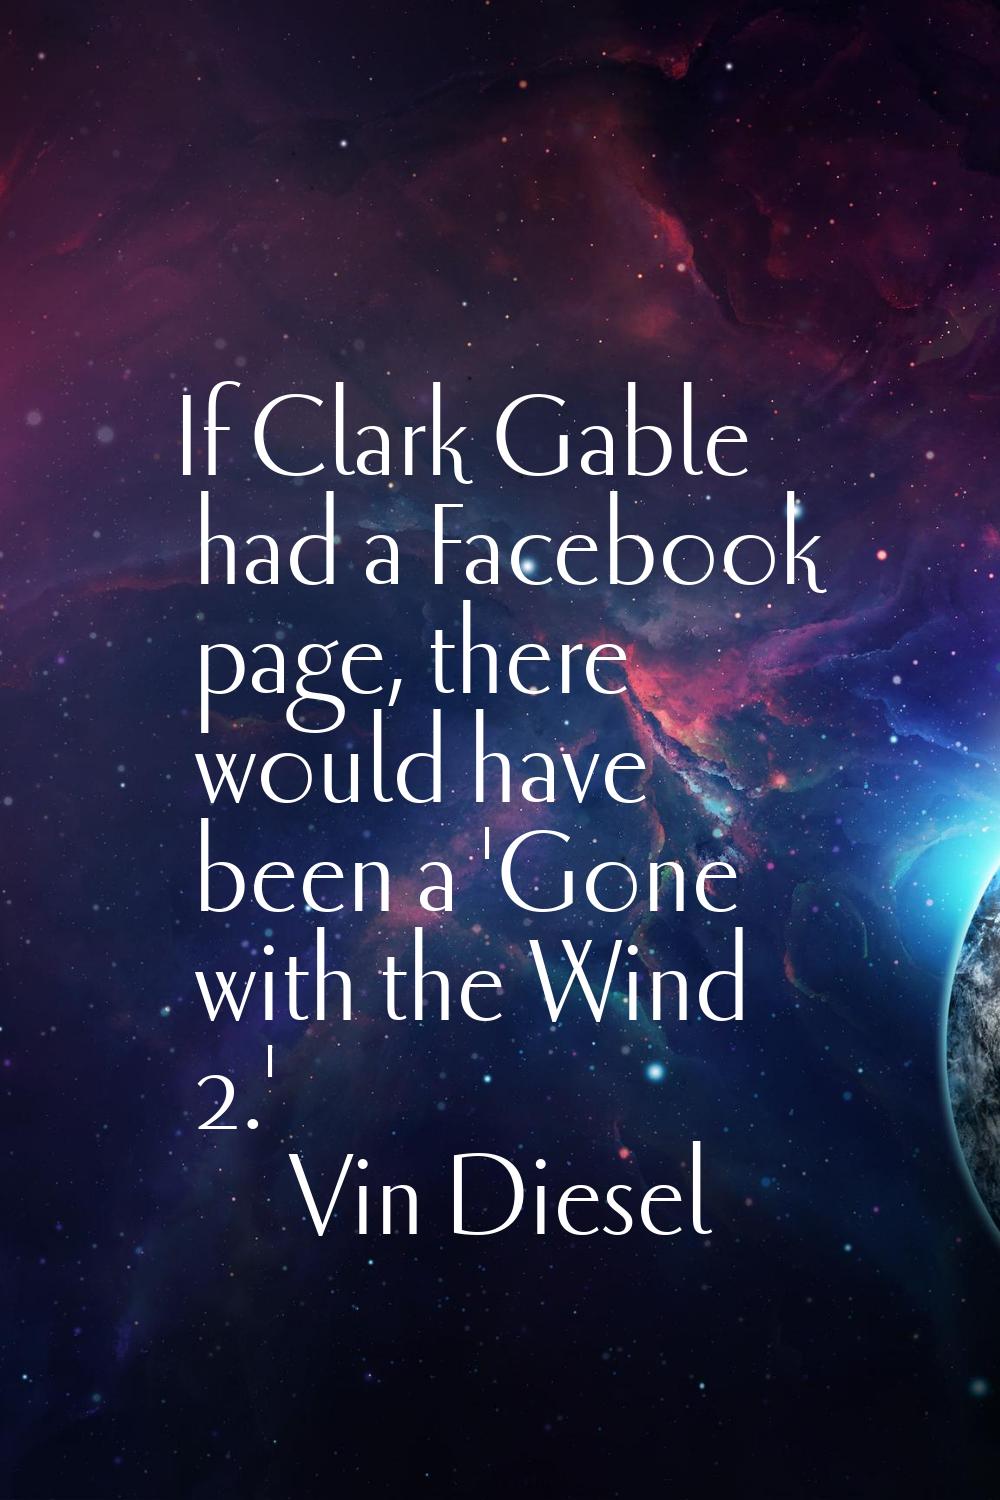 If Clark Gable had a Facebook page, there would have been a 'Gone with the Wind 2.'